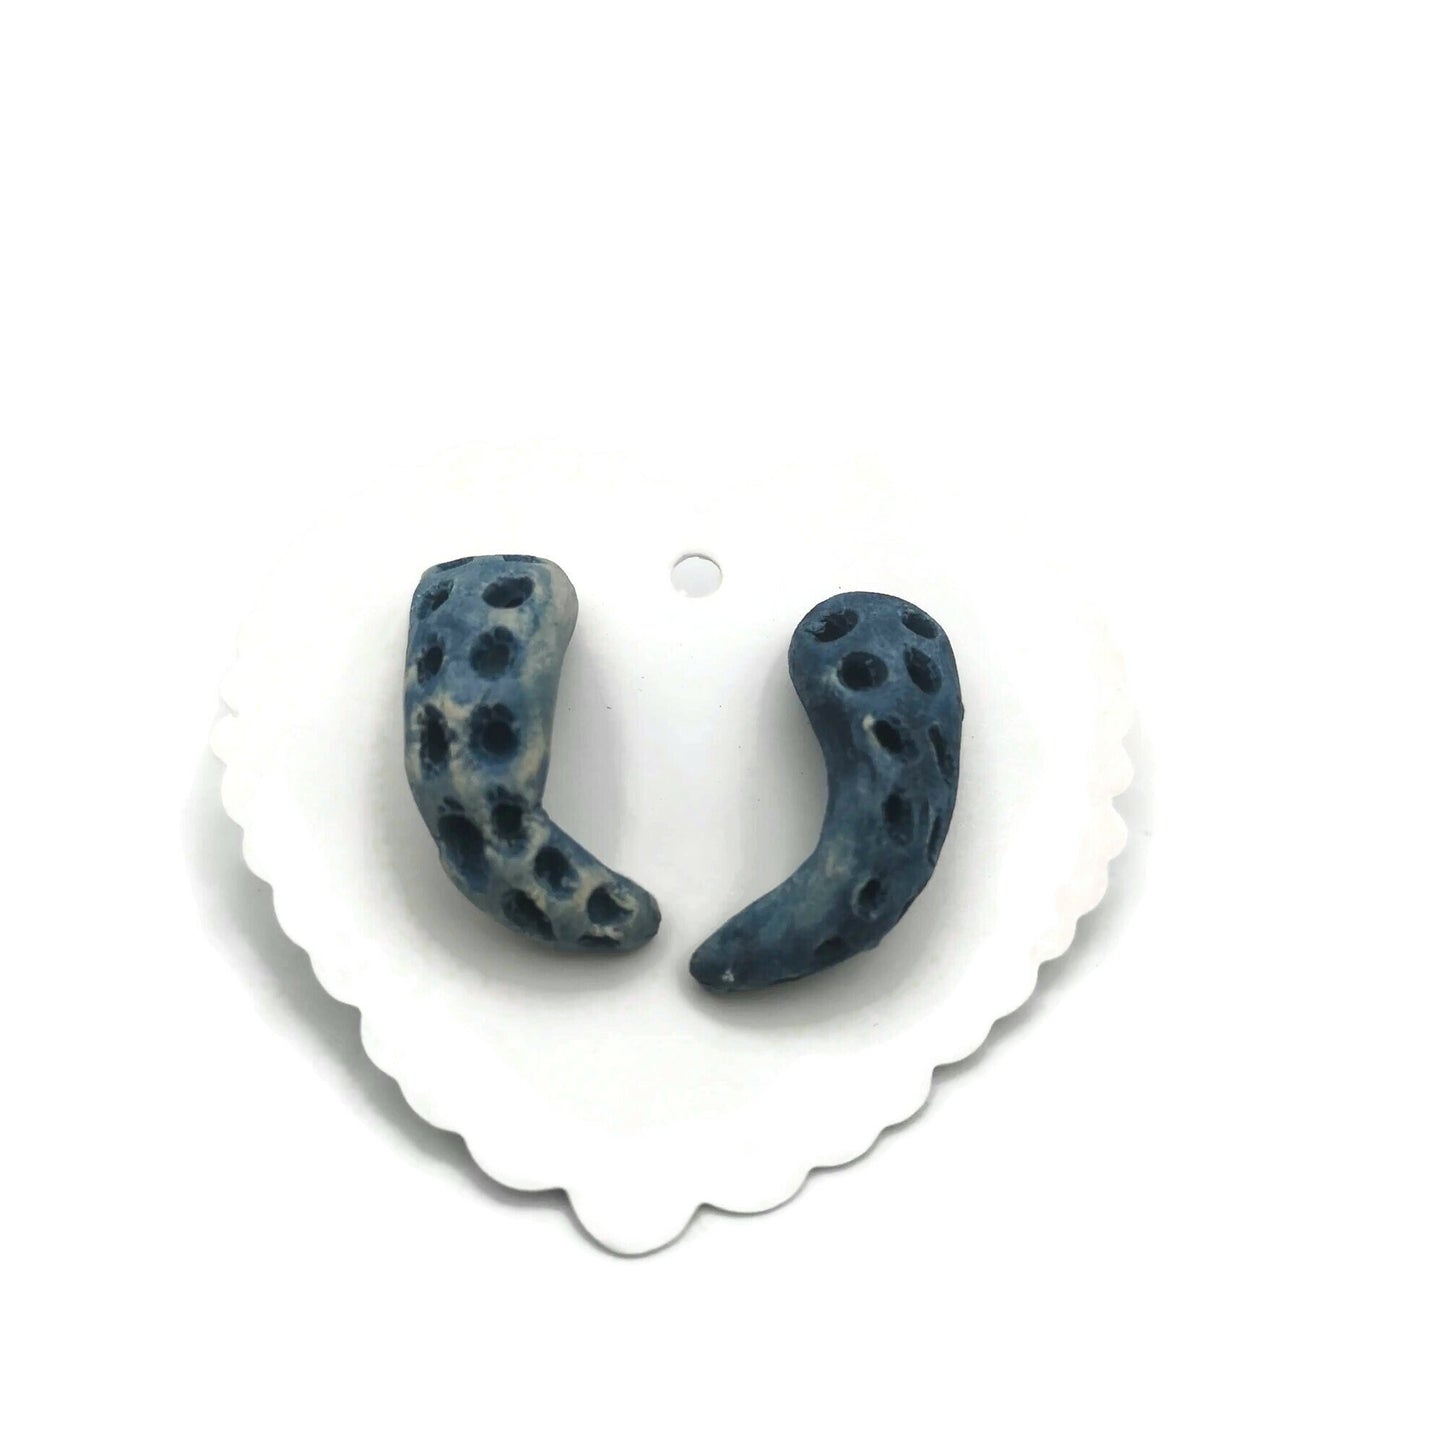 Octopus Earrings For Women, Minimalist Novelty Blue Stud Earrings, Best Gifts For Her, Artisan Clay Tentacle Jewelry - Ceramica Ana Rafael